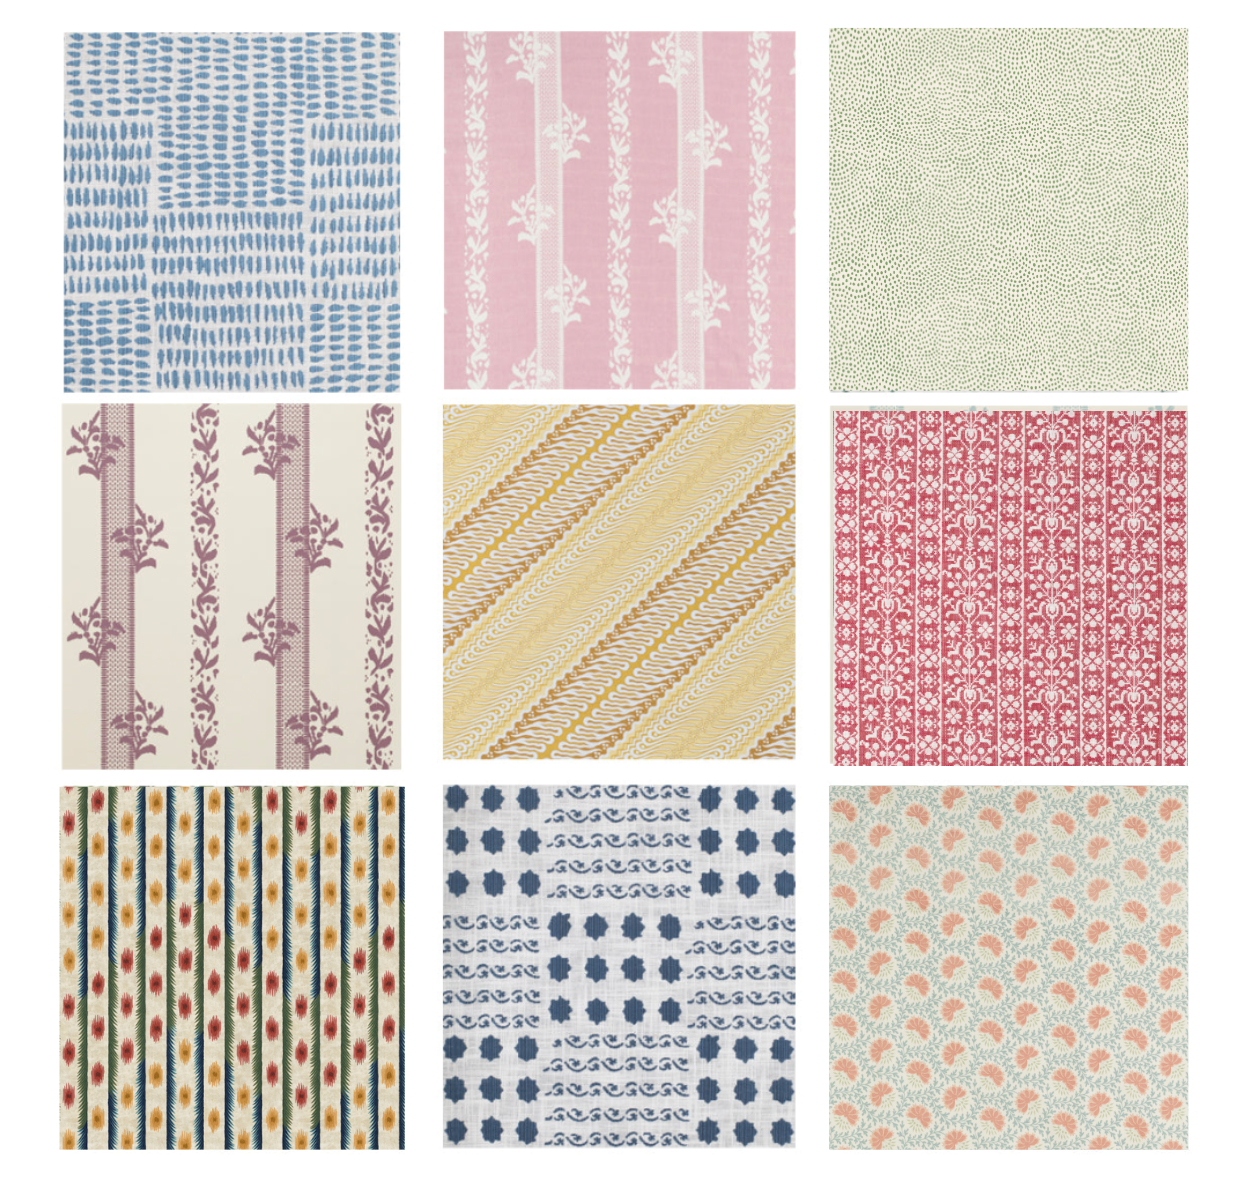 Swatch Set All New Fabrics and Wallcoverings